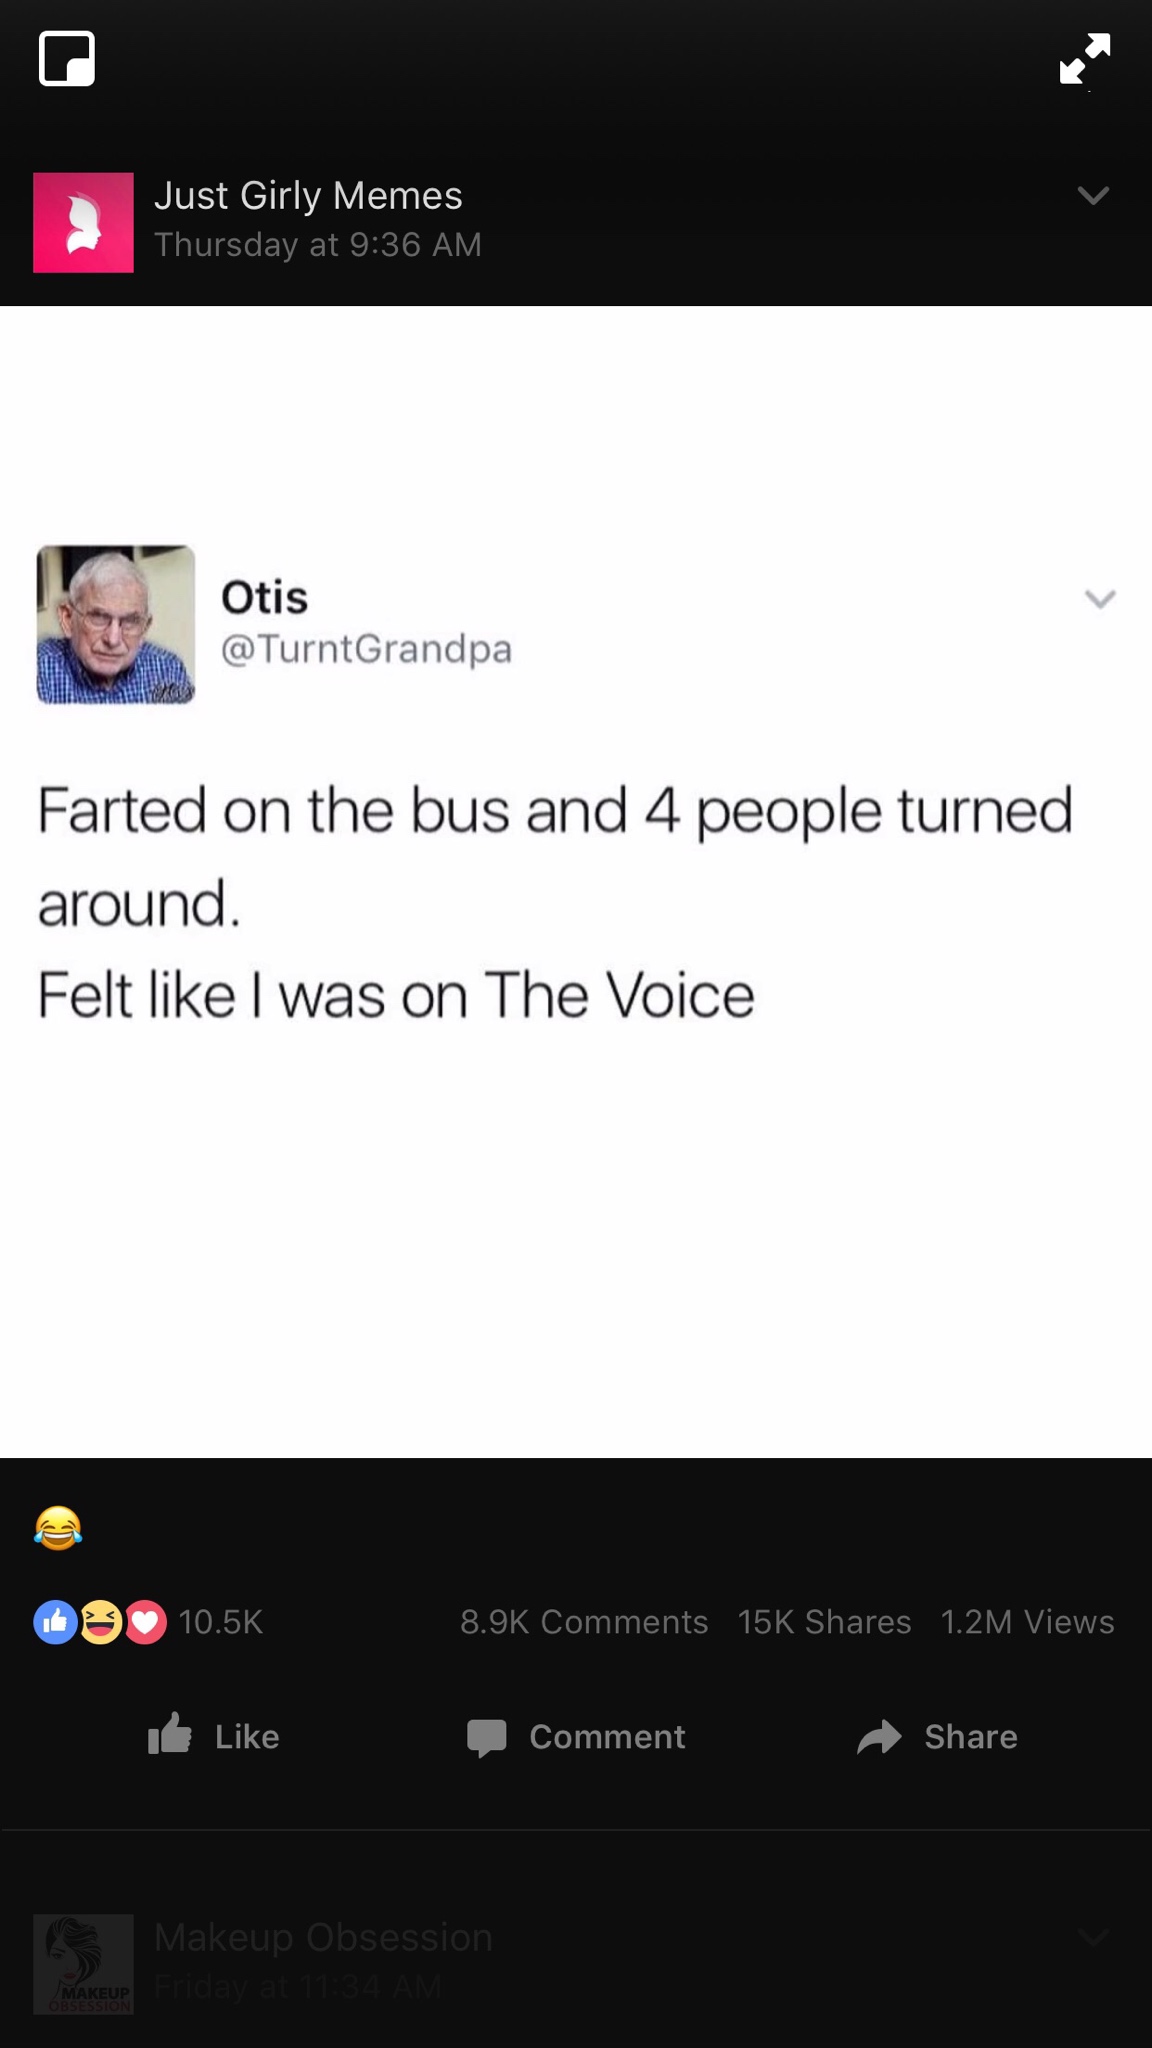 adam tots lips - Just Girly Memes Thursday at . Otis Farted on the bus and 4 people turned around. Felt I was on The Voice 8 15K 1.2M Views It Comment Makeup Obsession Makeup